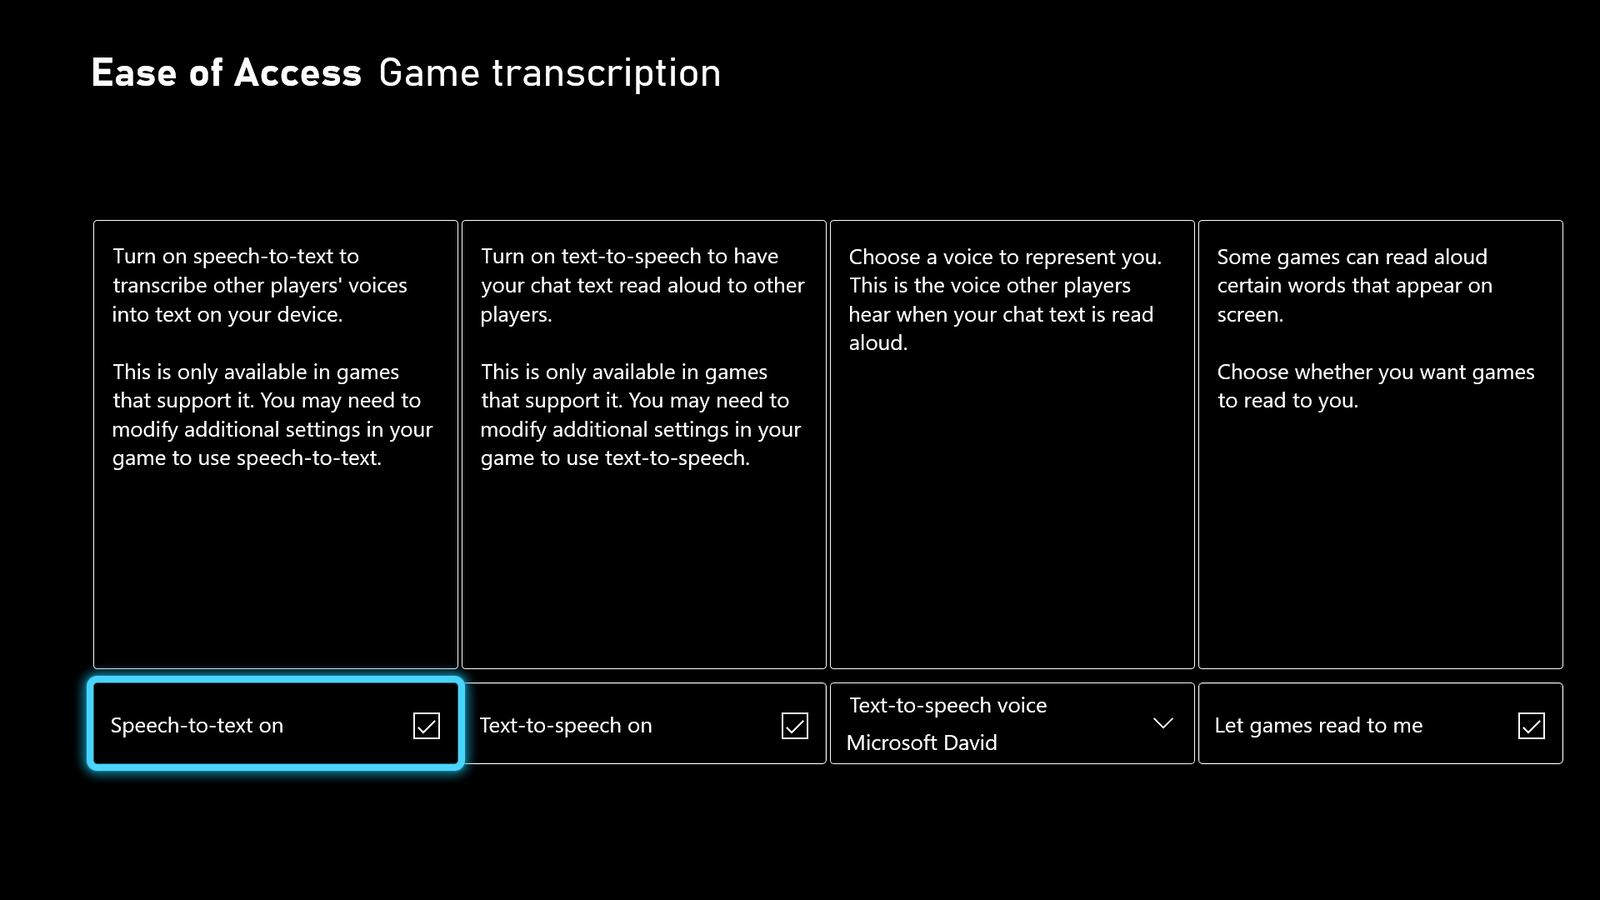  A screenshot from the Ease of Access settings in the Xbox Dashboard. The "Game Transcription" options are displayed and "Speech-to-text on" is highlighted and selected.